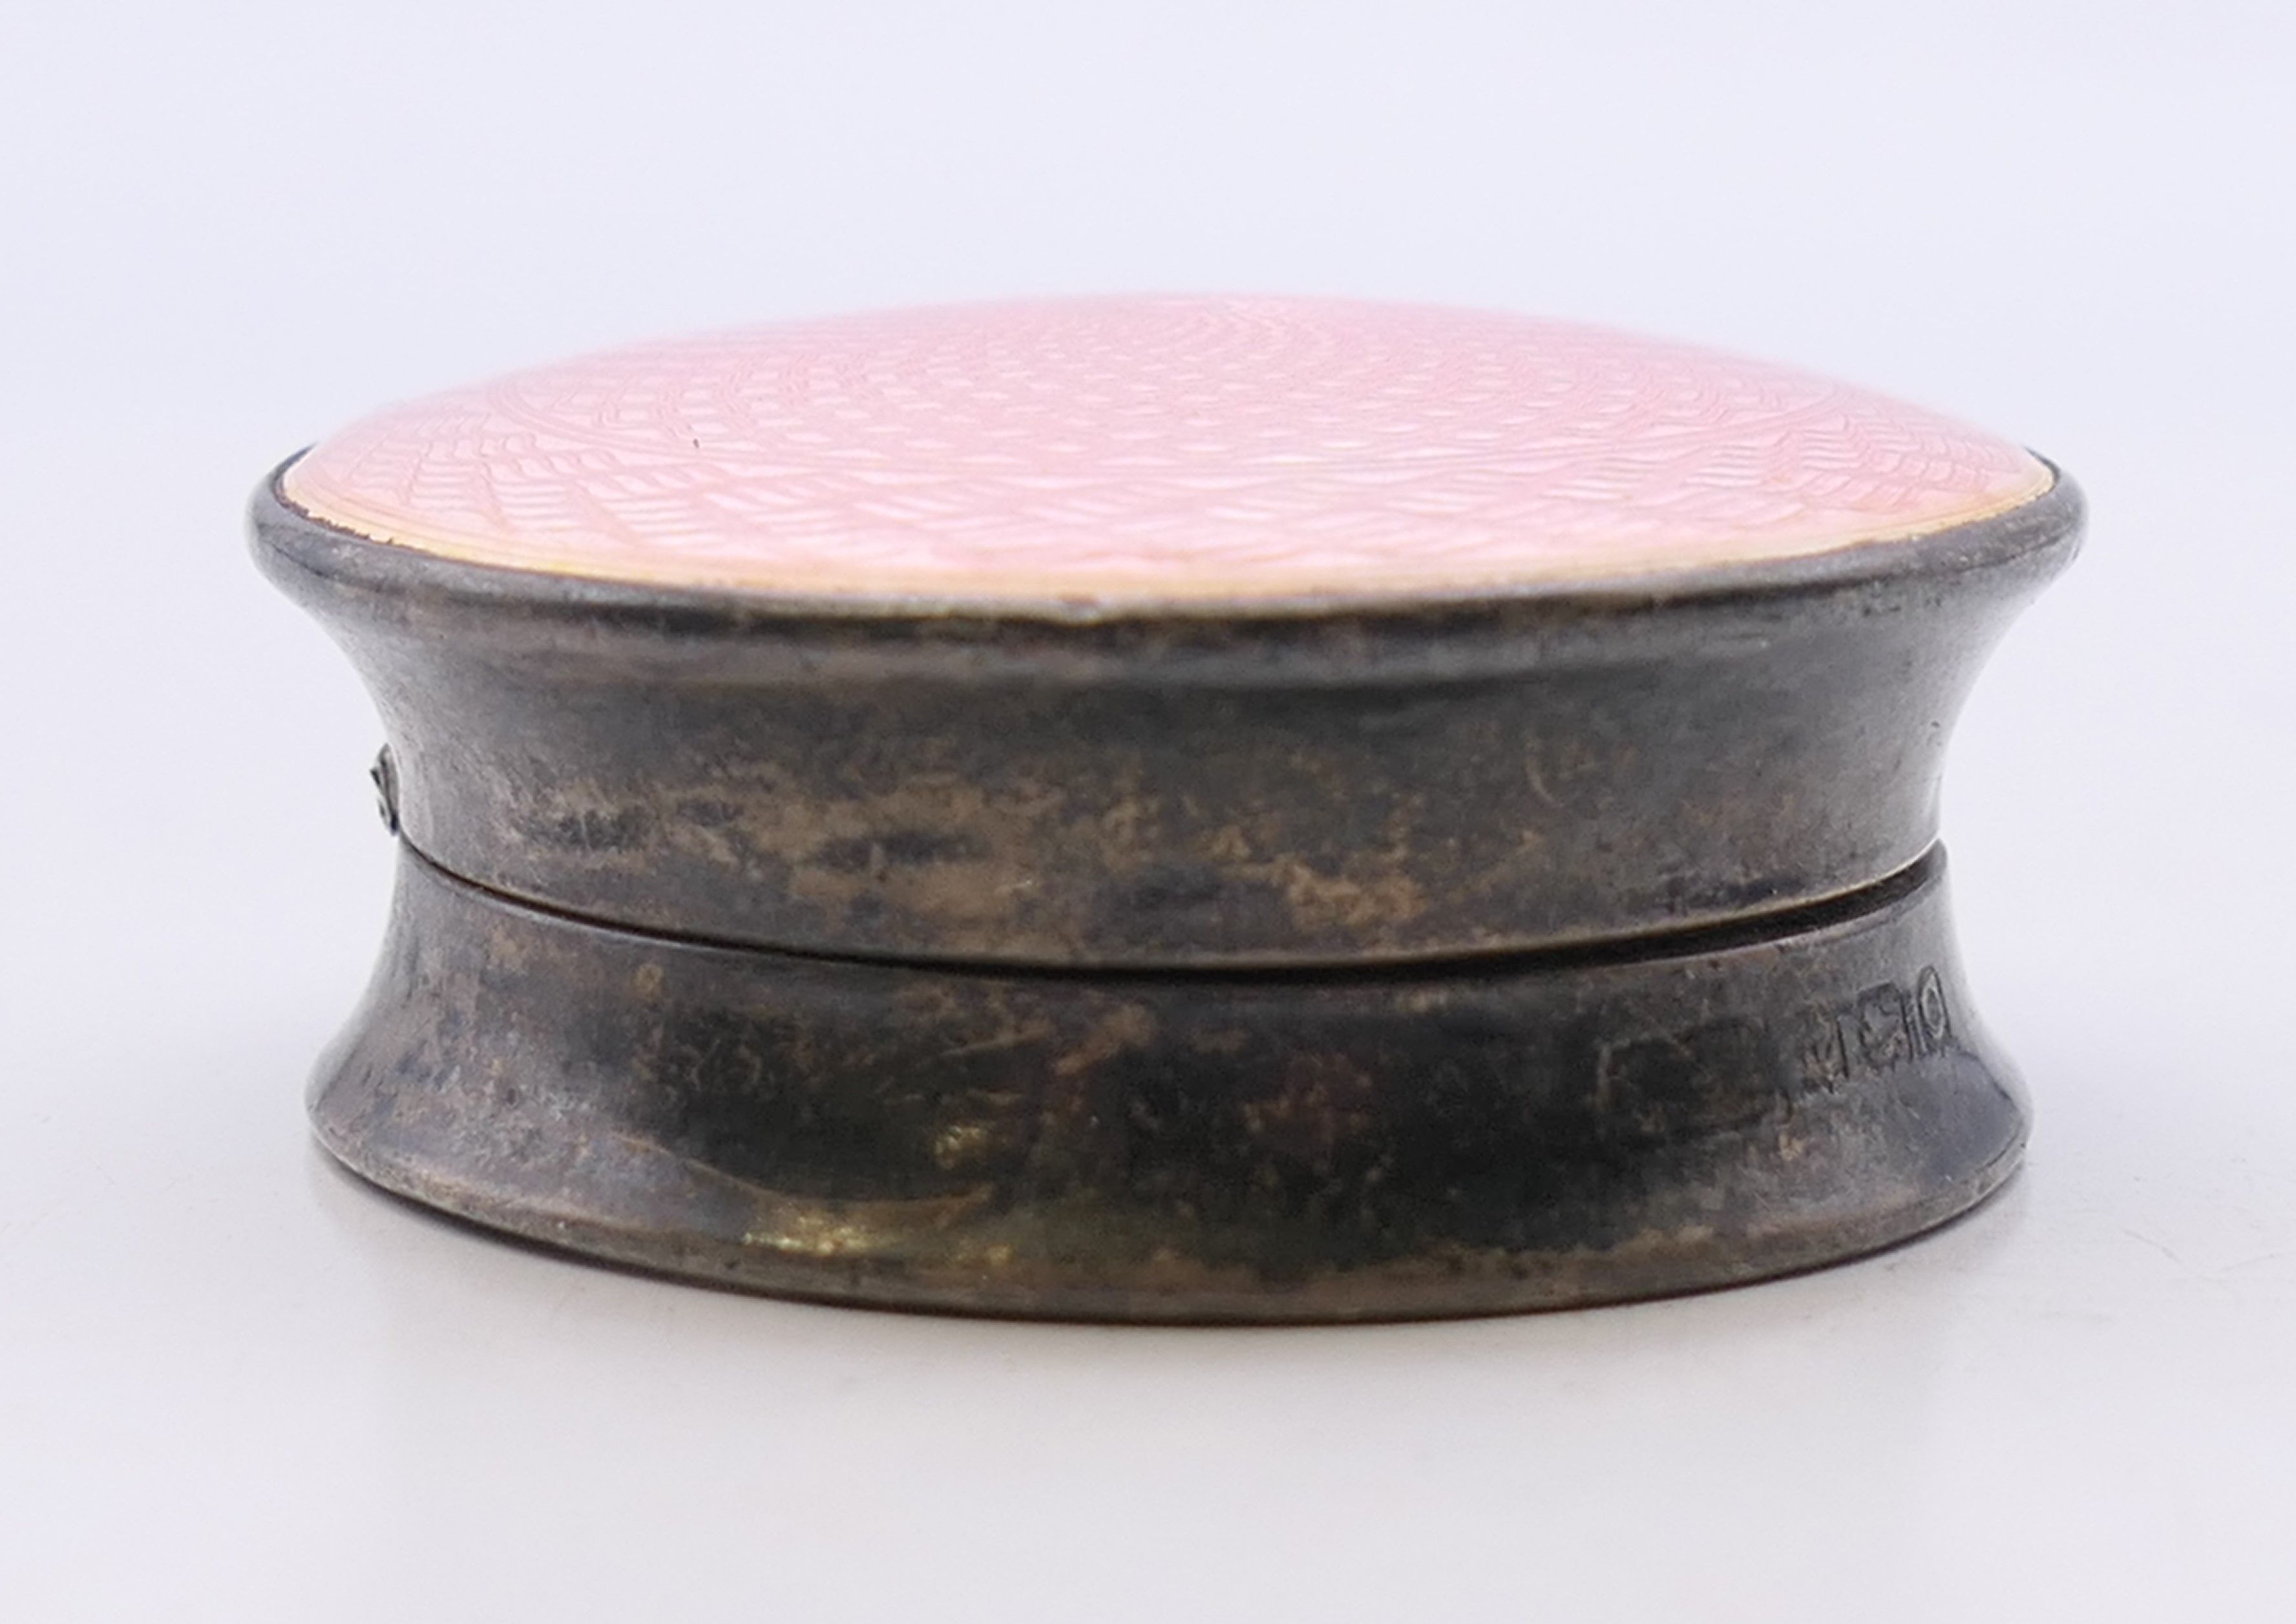 A silver and pink enamel balm pot. 3.75 cm diameter. - Image 4 of 5